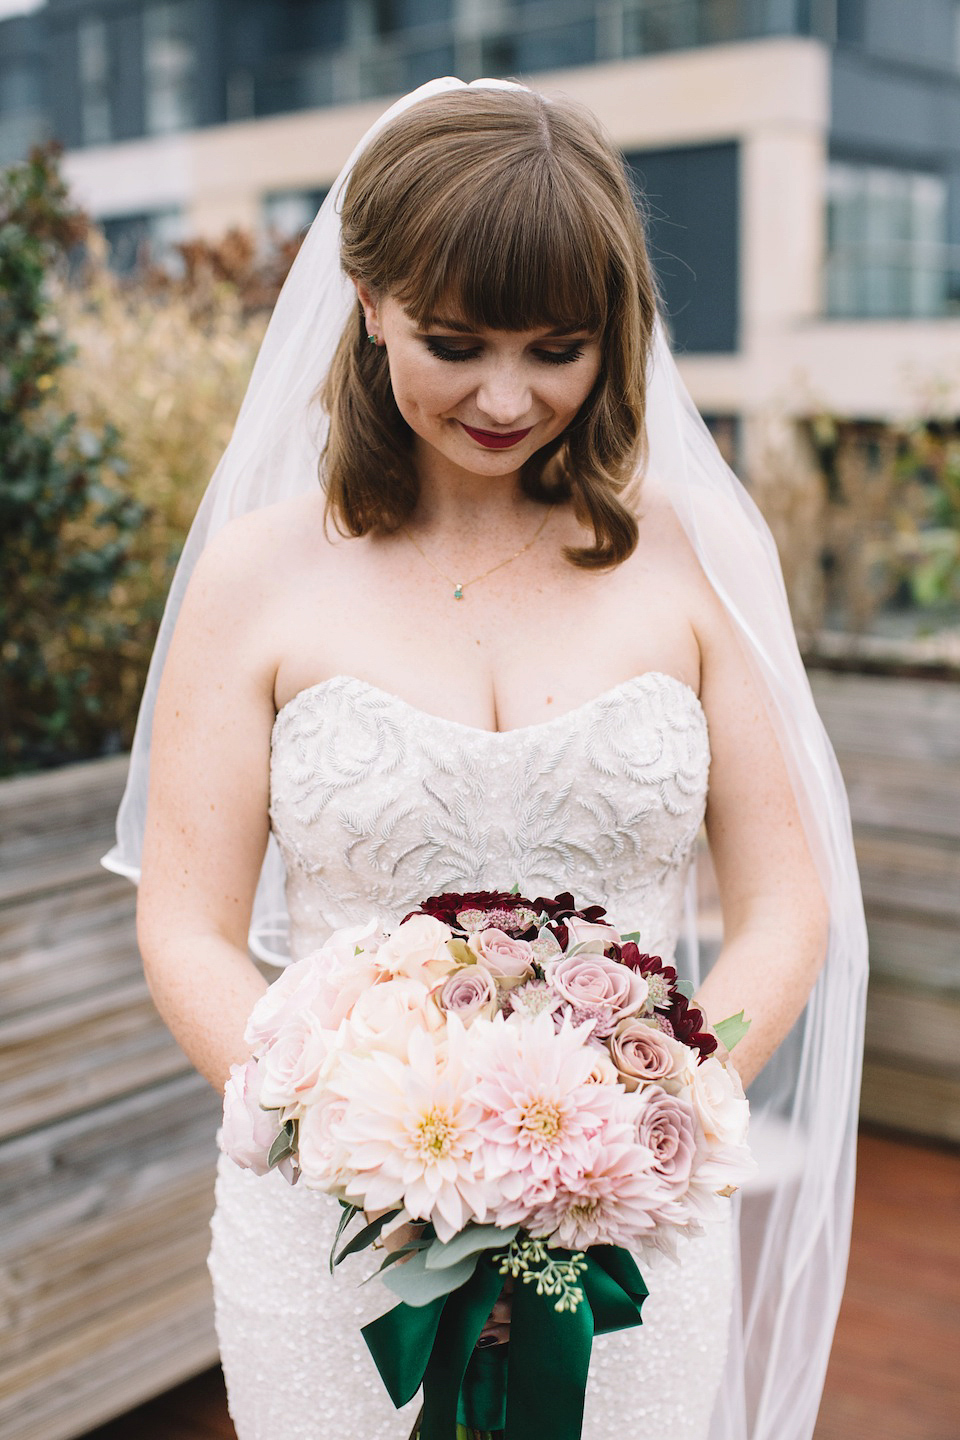 The bride wore a Karen Willis Holmes gown for her London wedding in shades of green. Photography by Alex Wysocki.